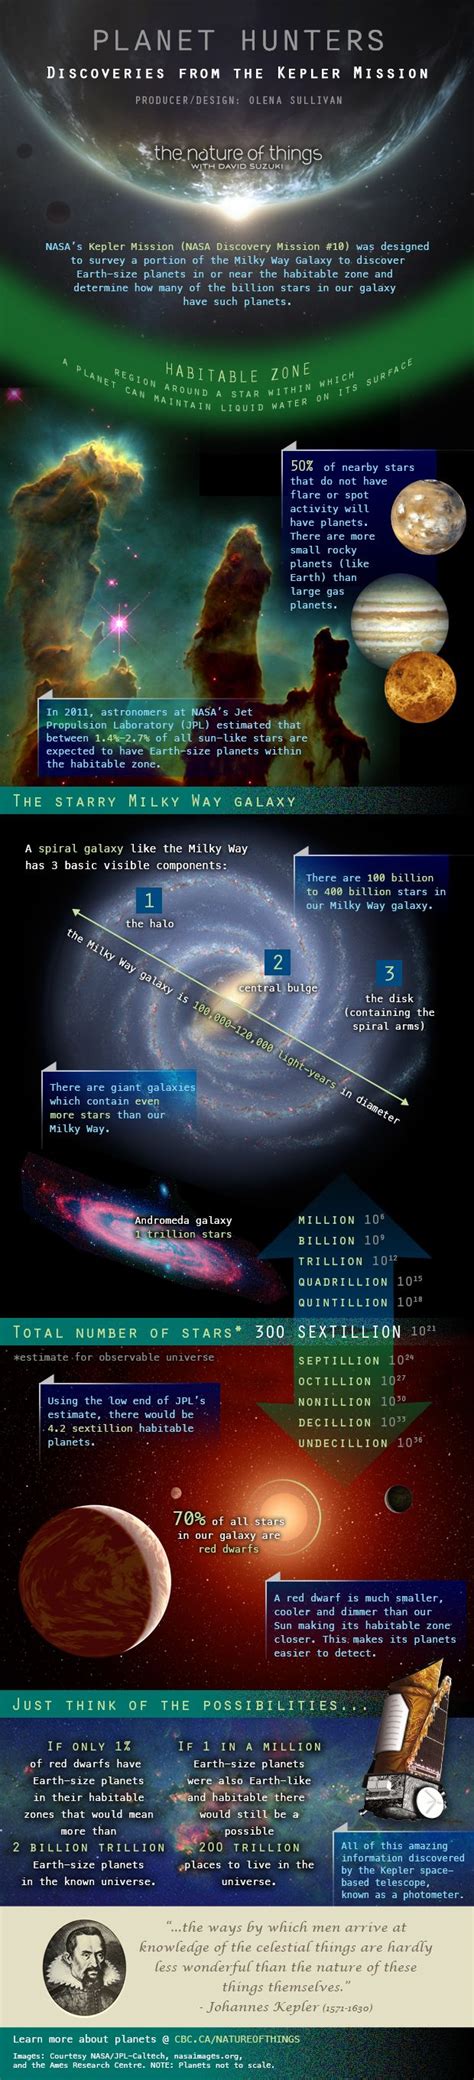 Nasas Kepler Mission Was Designed To Survey A Portion Of The Milky Way